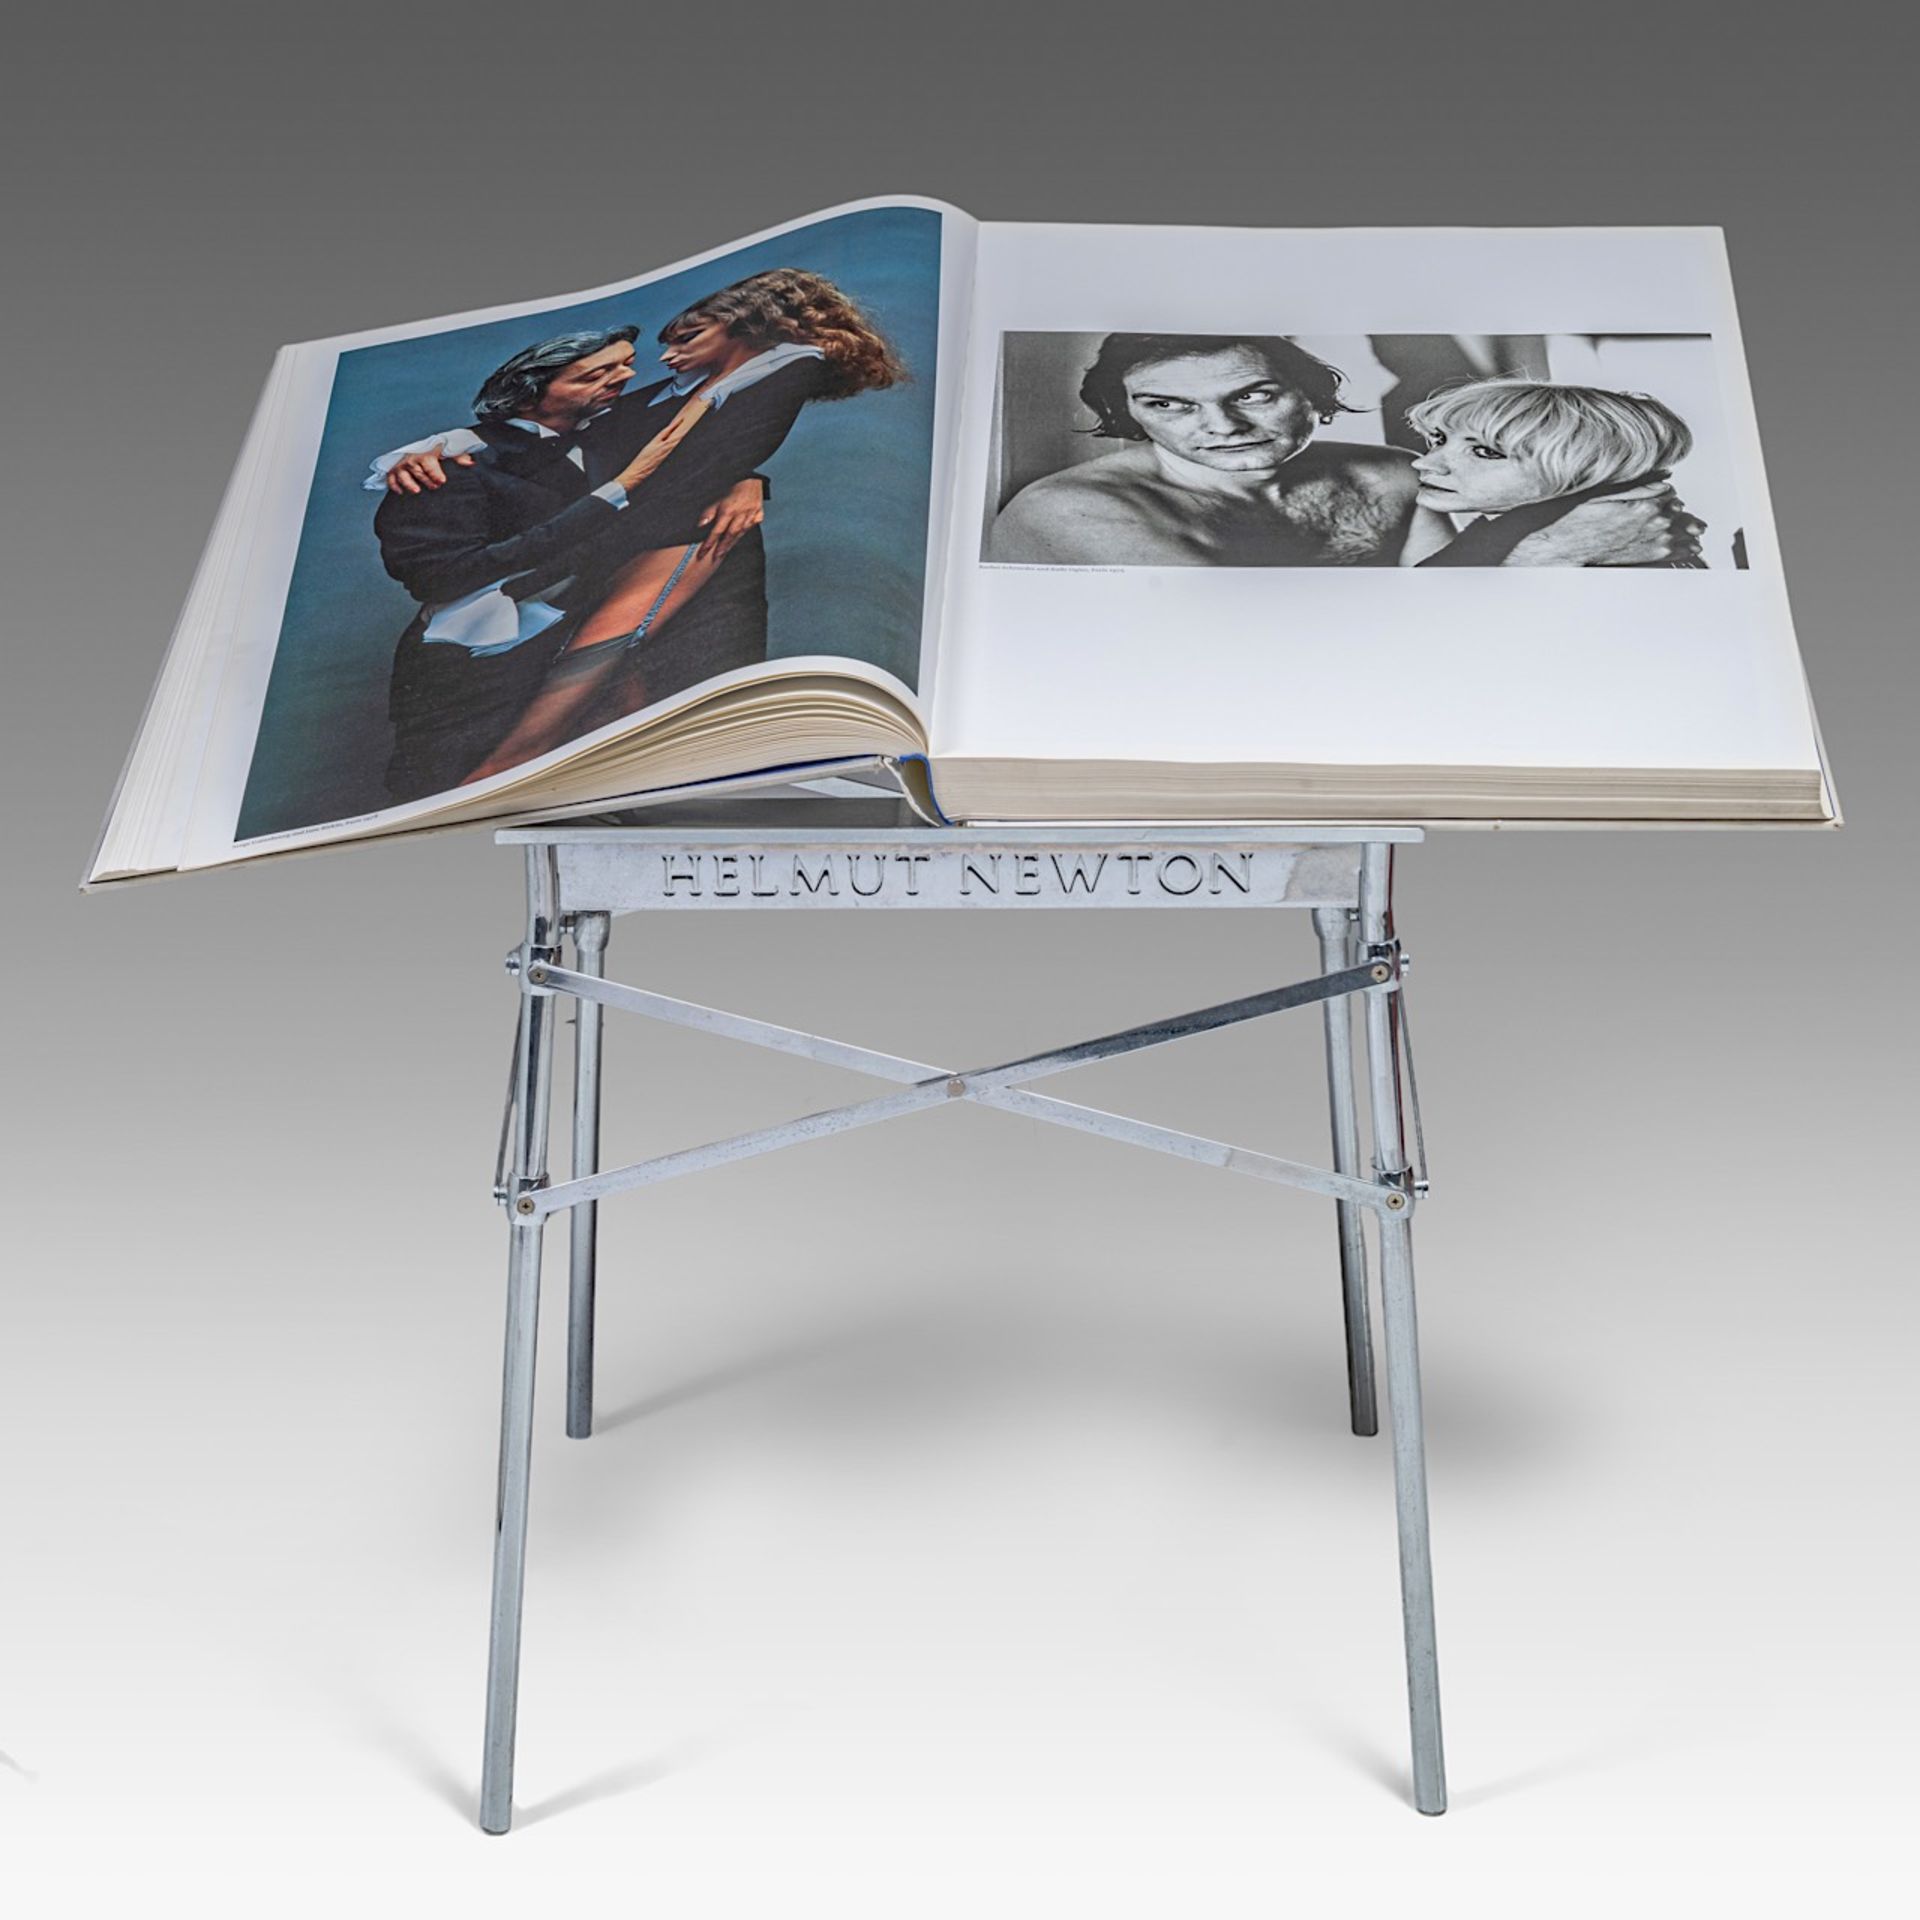 A Helmut Newton 'Sumo' book on stand, Taschen, 1999, signed and numbered - Image 20 of 20